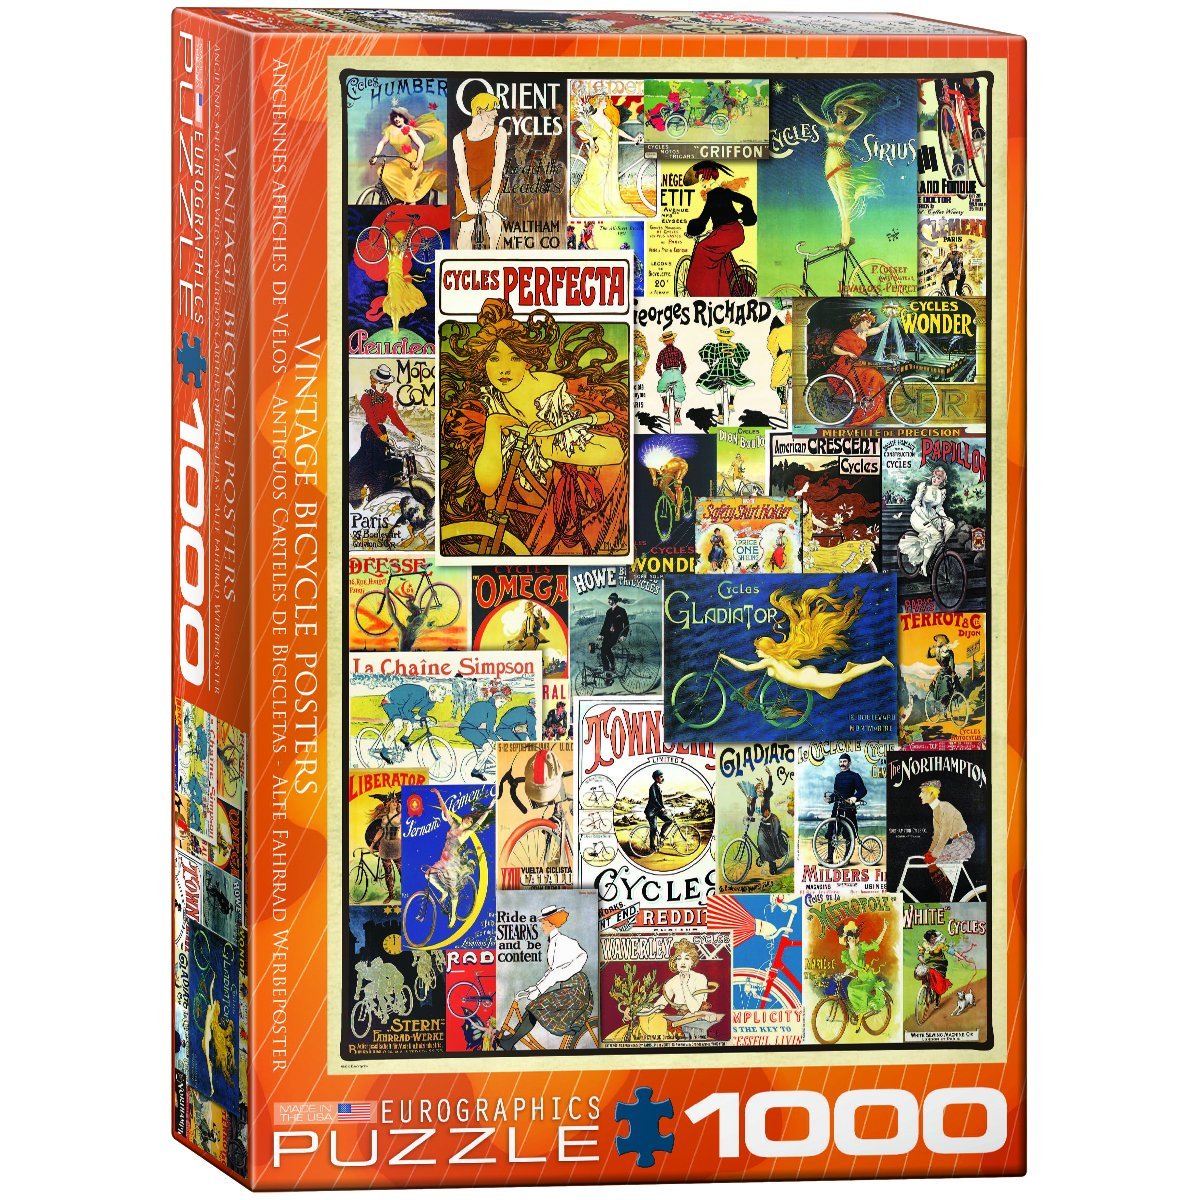 Eurographics - Vintage Bicycle Posters - 1000 Piece Jigsaw Puzzle